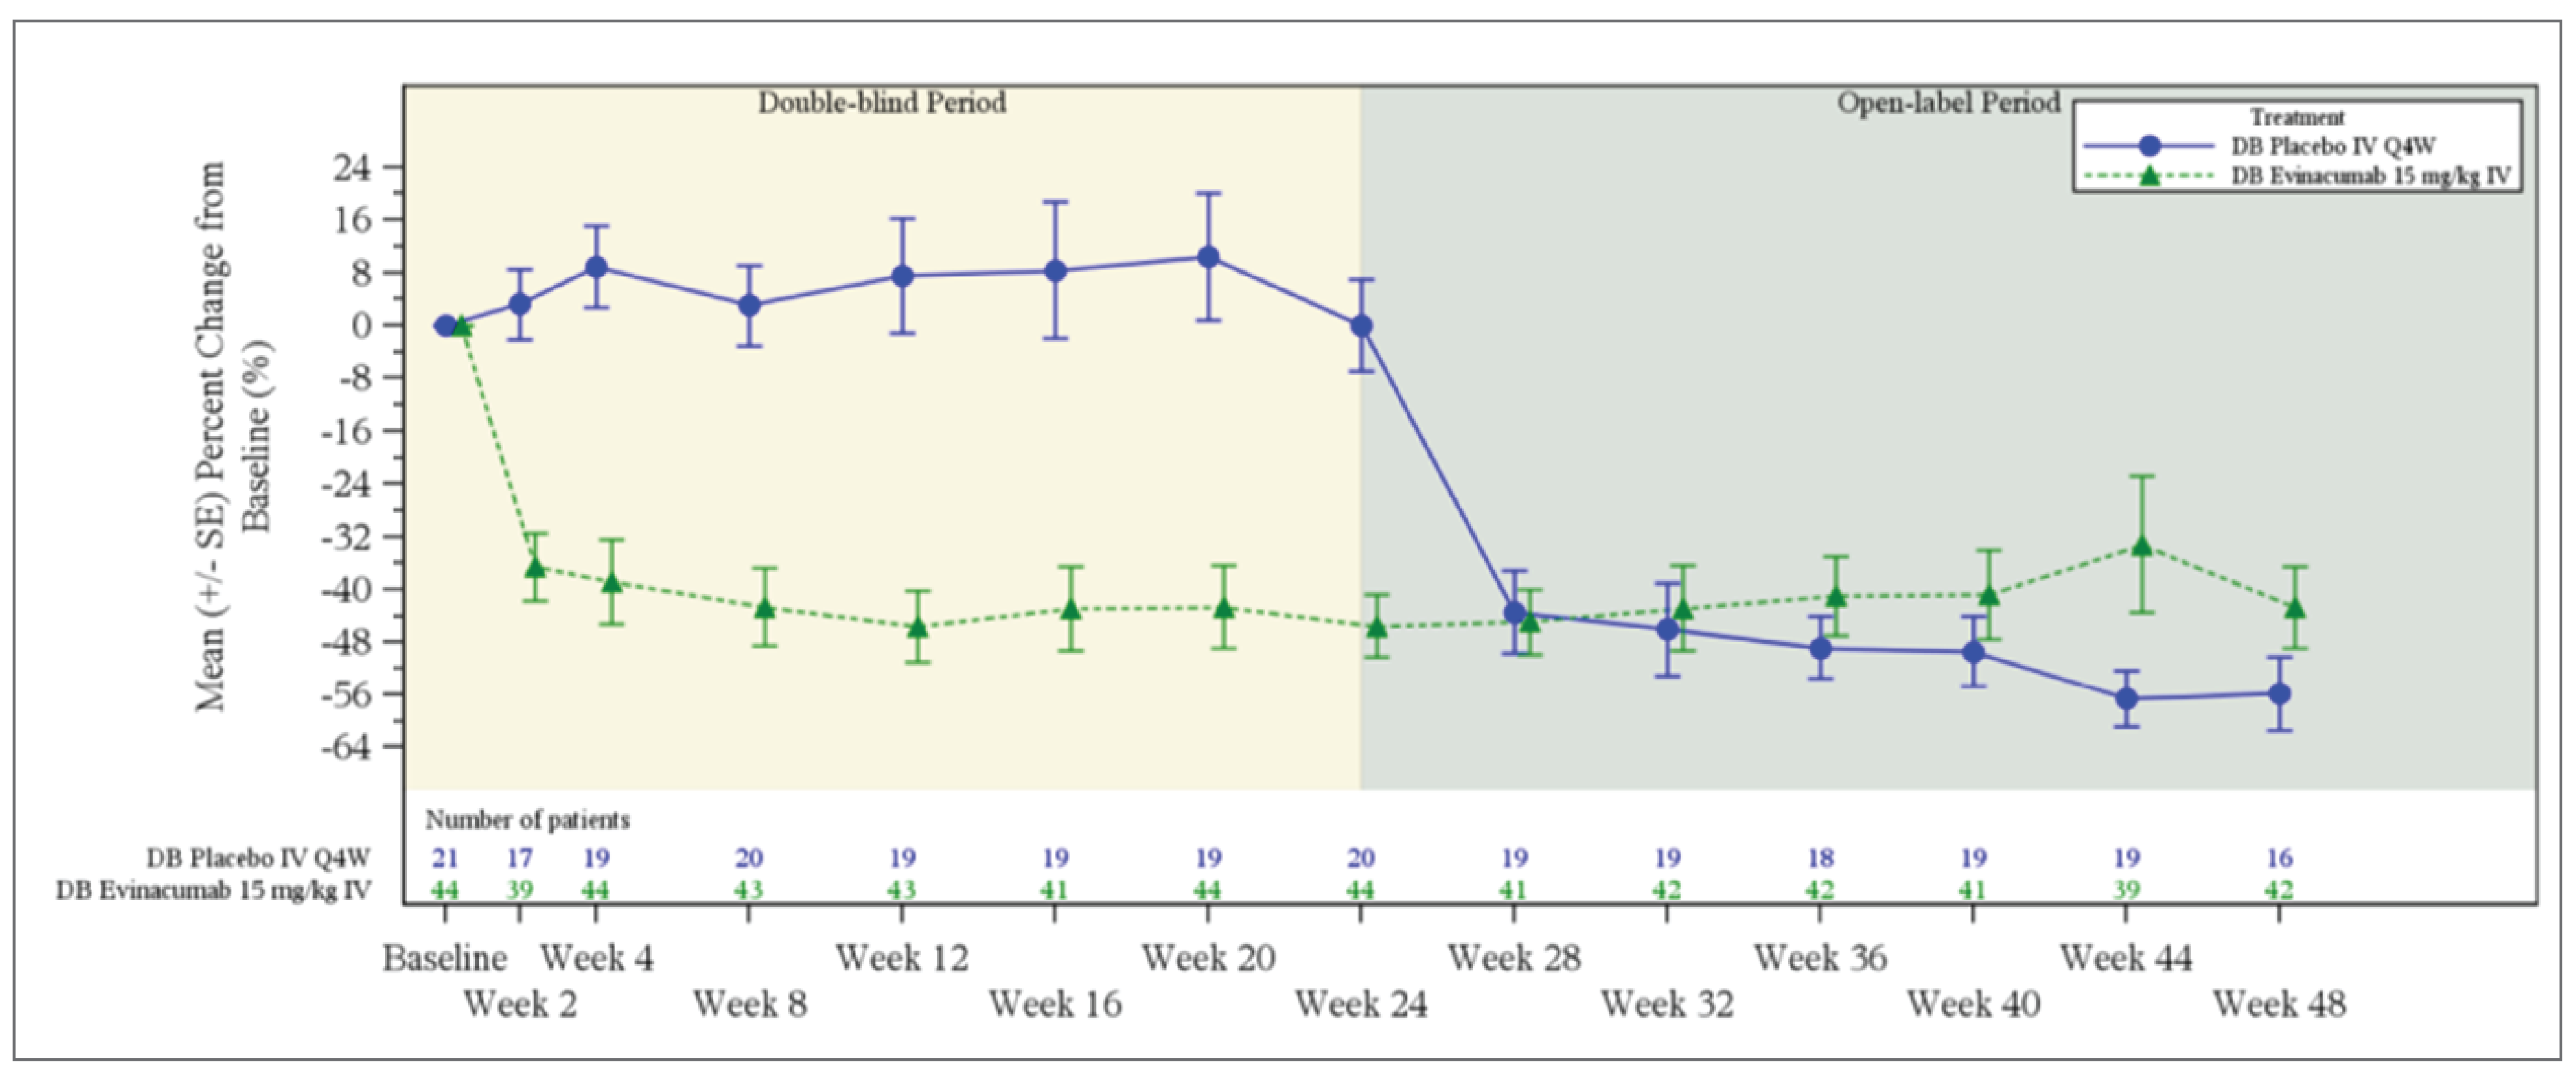 Plot of mean percent change in LDL-C over time by double-blind evinacumab and placebo groups over the double-blind (baseline to week 24) and open-label treatment periods (week 24 to week 48). A sharp decrease in LDL-C levels to below 40% is seen at week 2 with evinacumab which is sustained until the end of the double-blind treatment period (24 weeks), while baseline LDL-C levels remain consistent throughout the treatment period with placebo. In the open-label treatment period, for patients continuing evinacumab, percent change from baseline remained consistent over time from the double-blind treatment period. In patients from the placebo group receiving open-label evinacumab, LDL-C levels sharply decrease from Week 24 to week 48, consistent with patients who received evinacumab throughout the study.